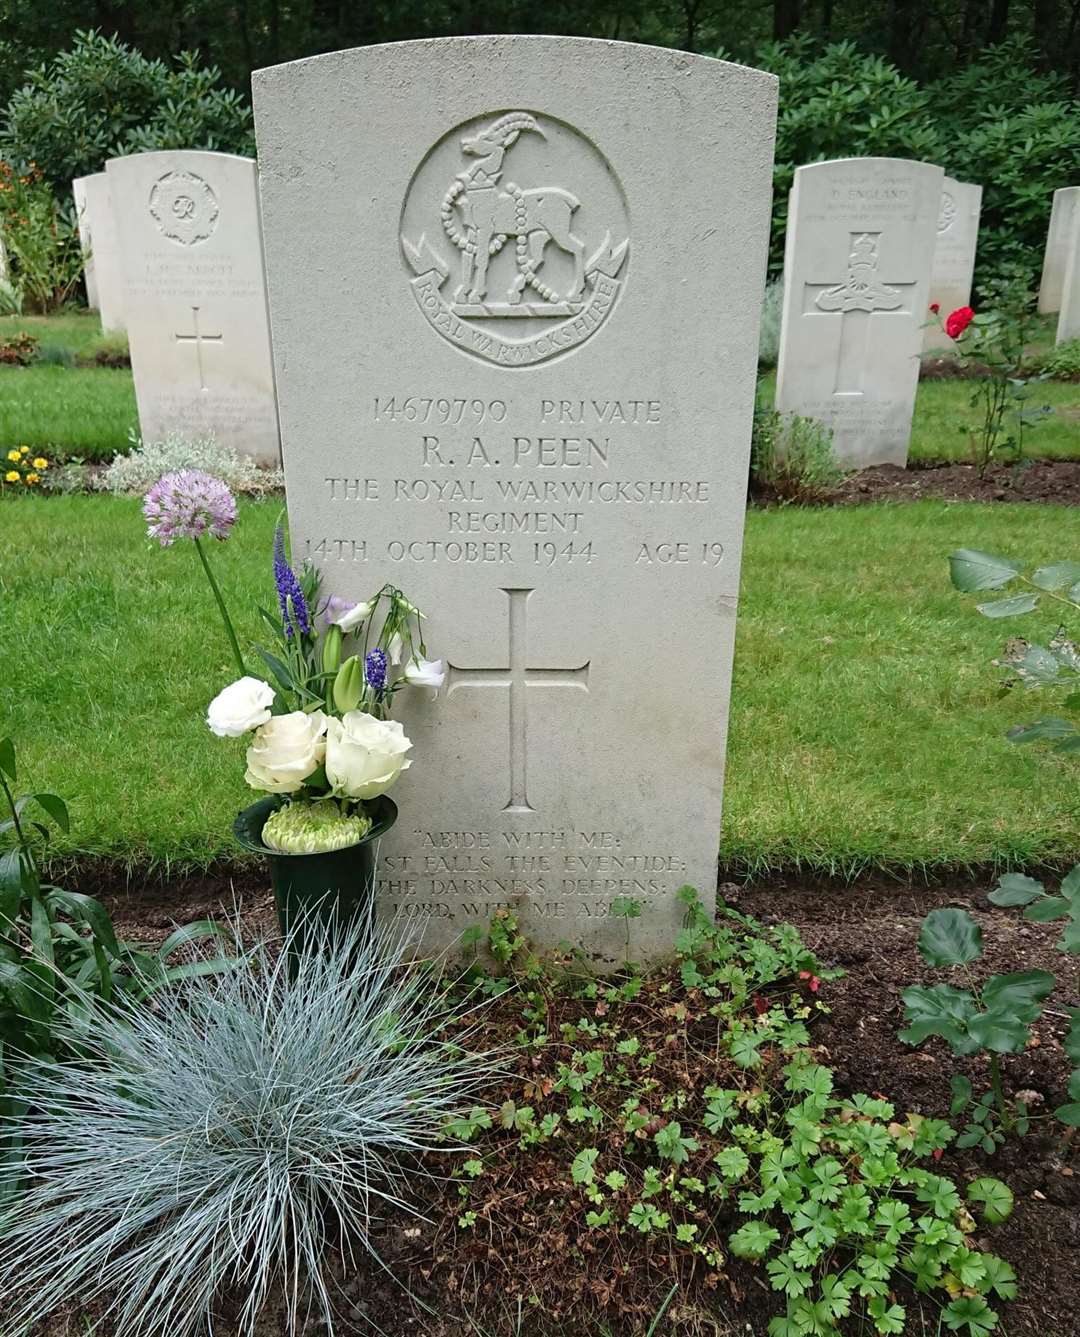 The grave of Private Roland Peen